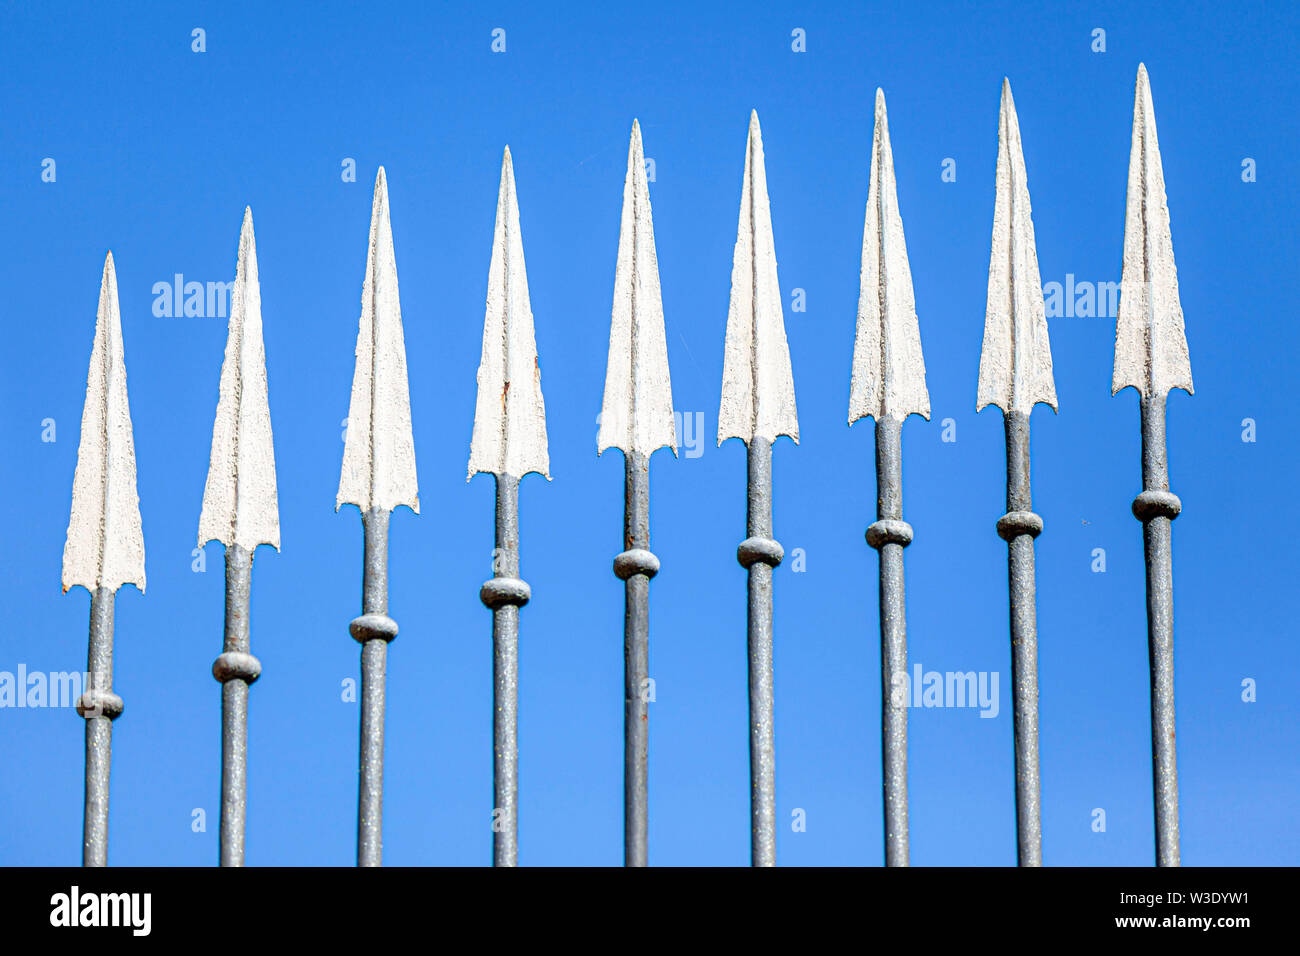 Nine arrows from a iron gate and blue sky. Stock Photo